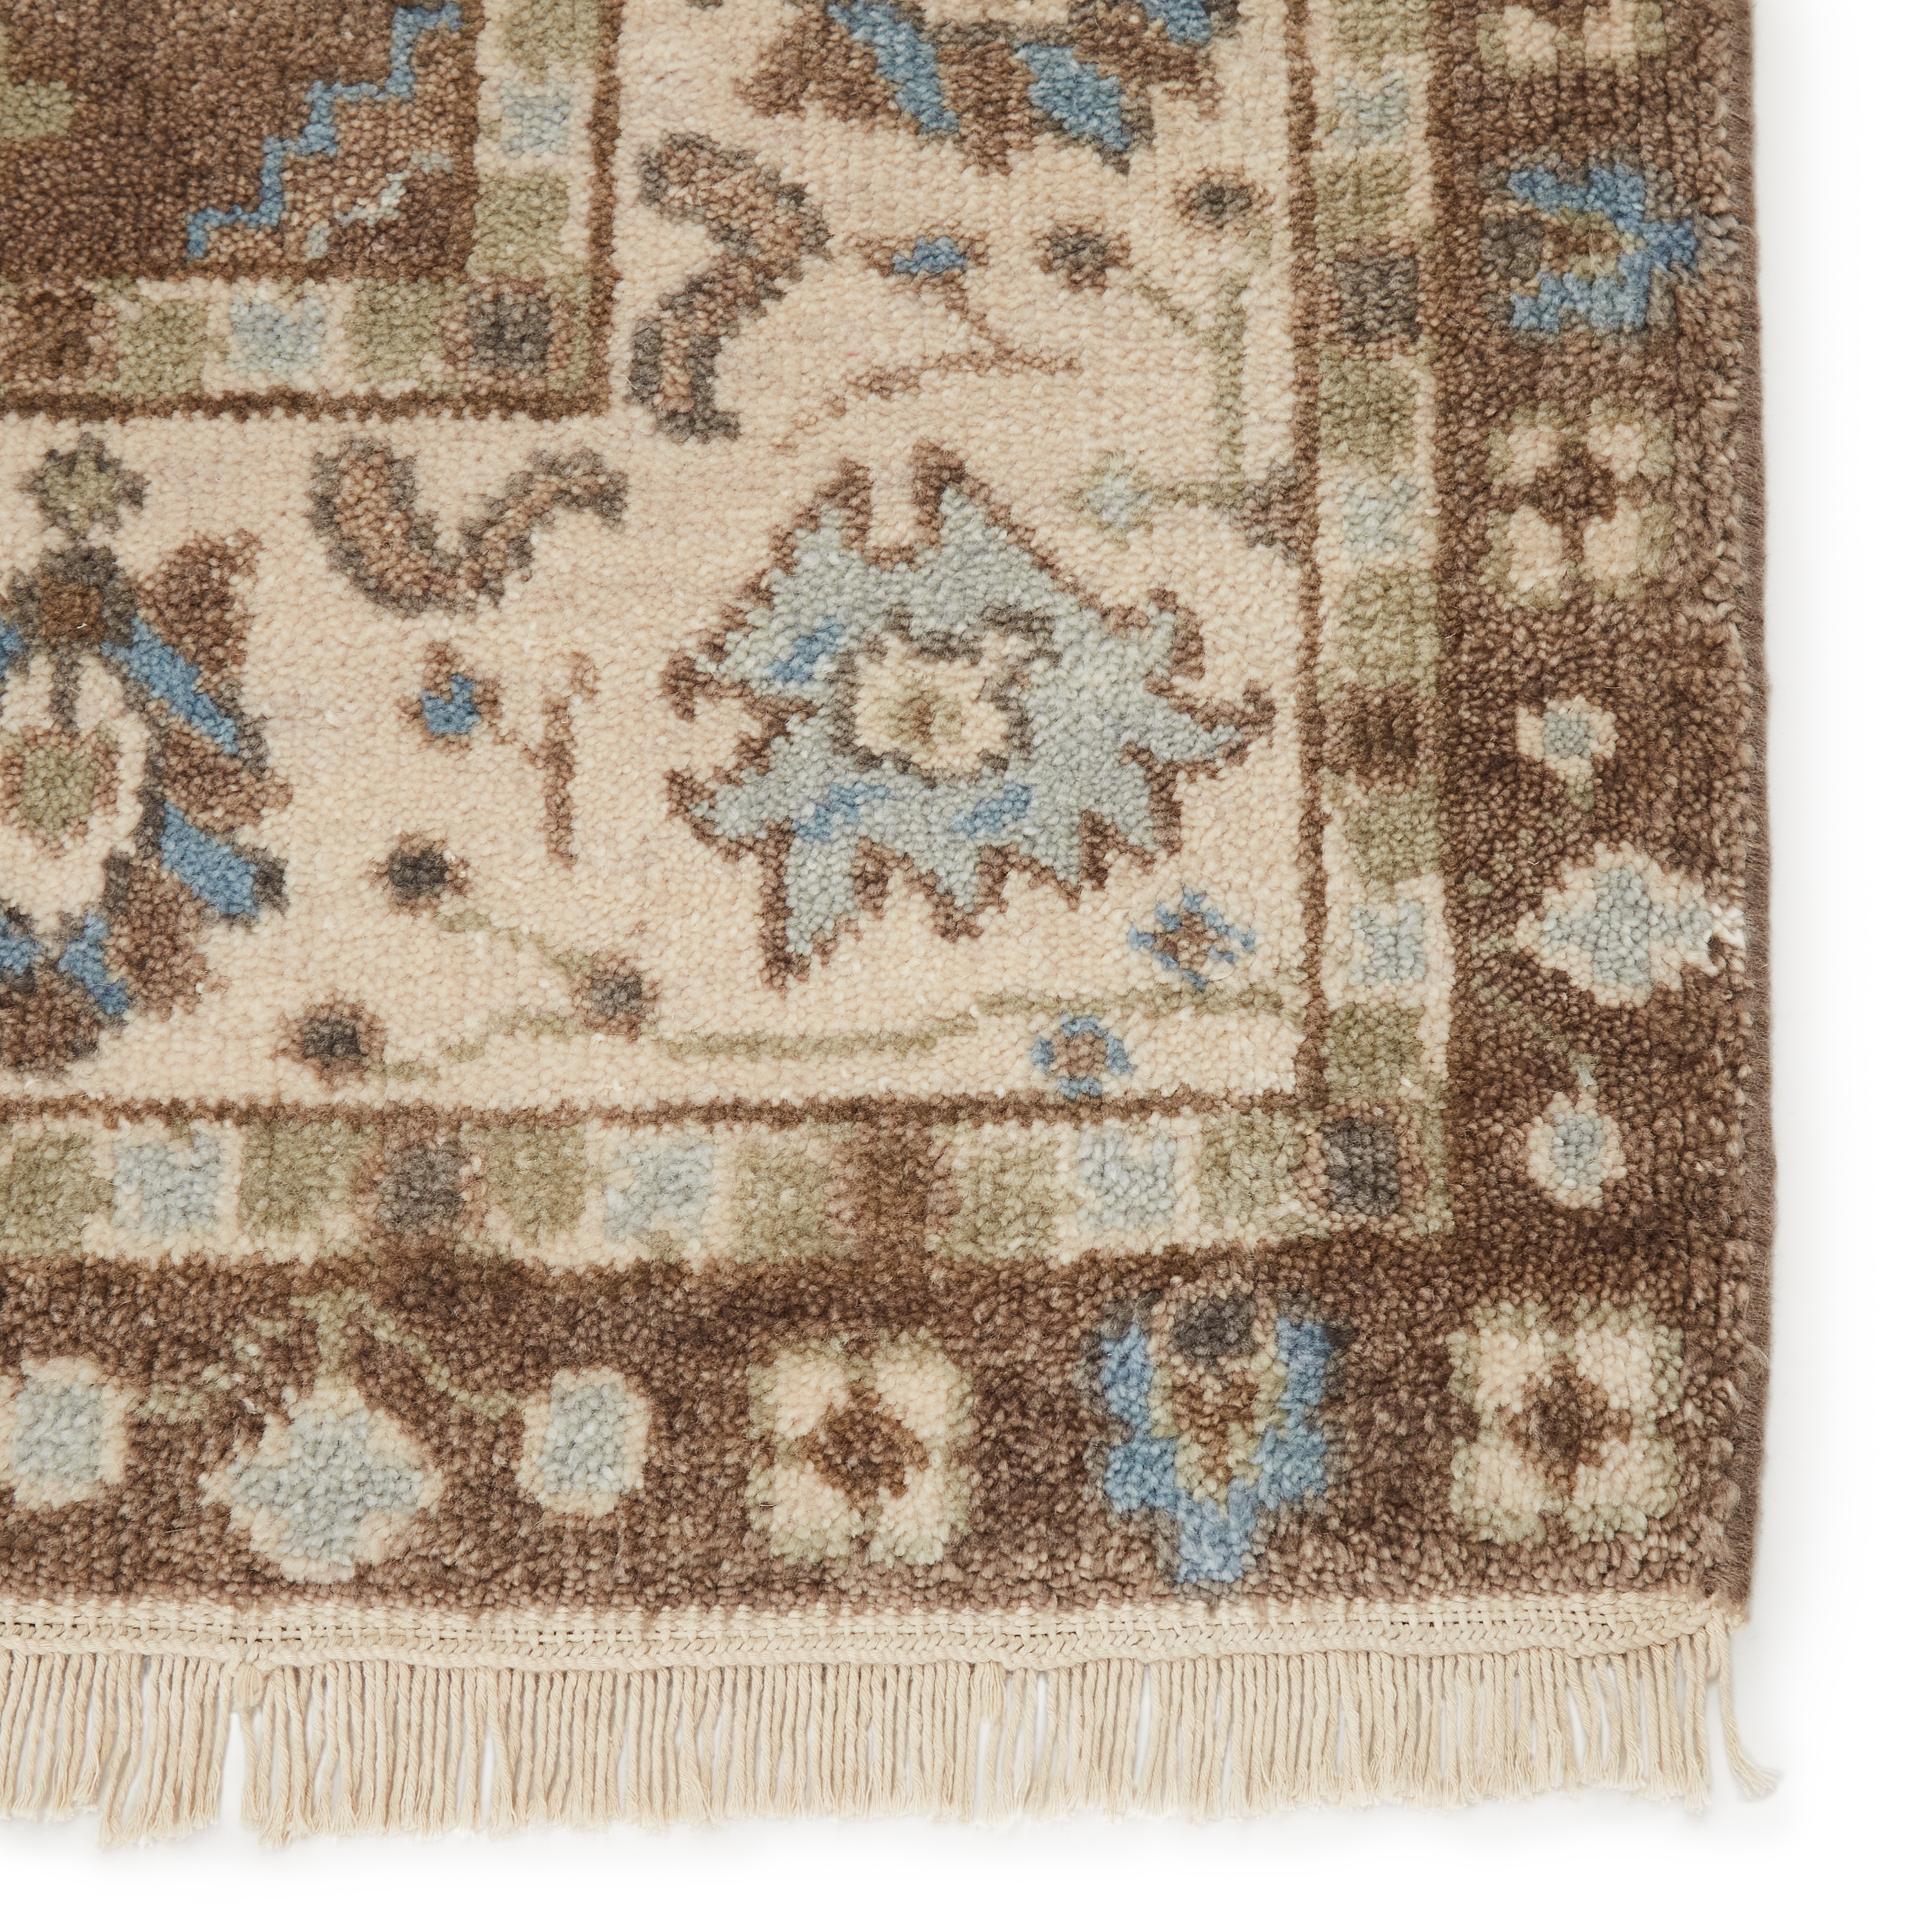 Princeton Hand-Knotted Floral Tan/ Light Blue Area Rug (2'X3') - Image 3